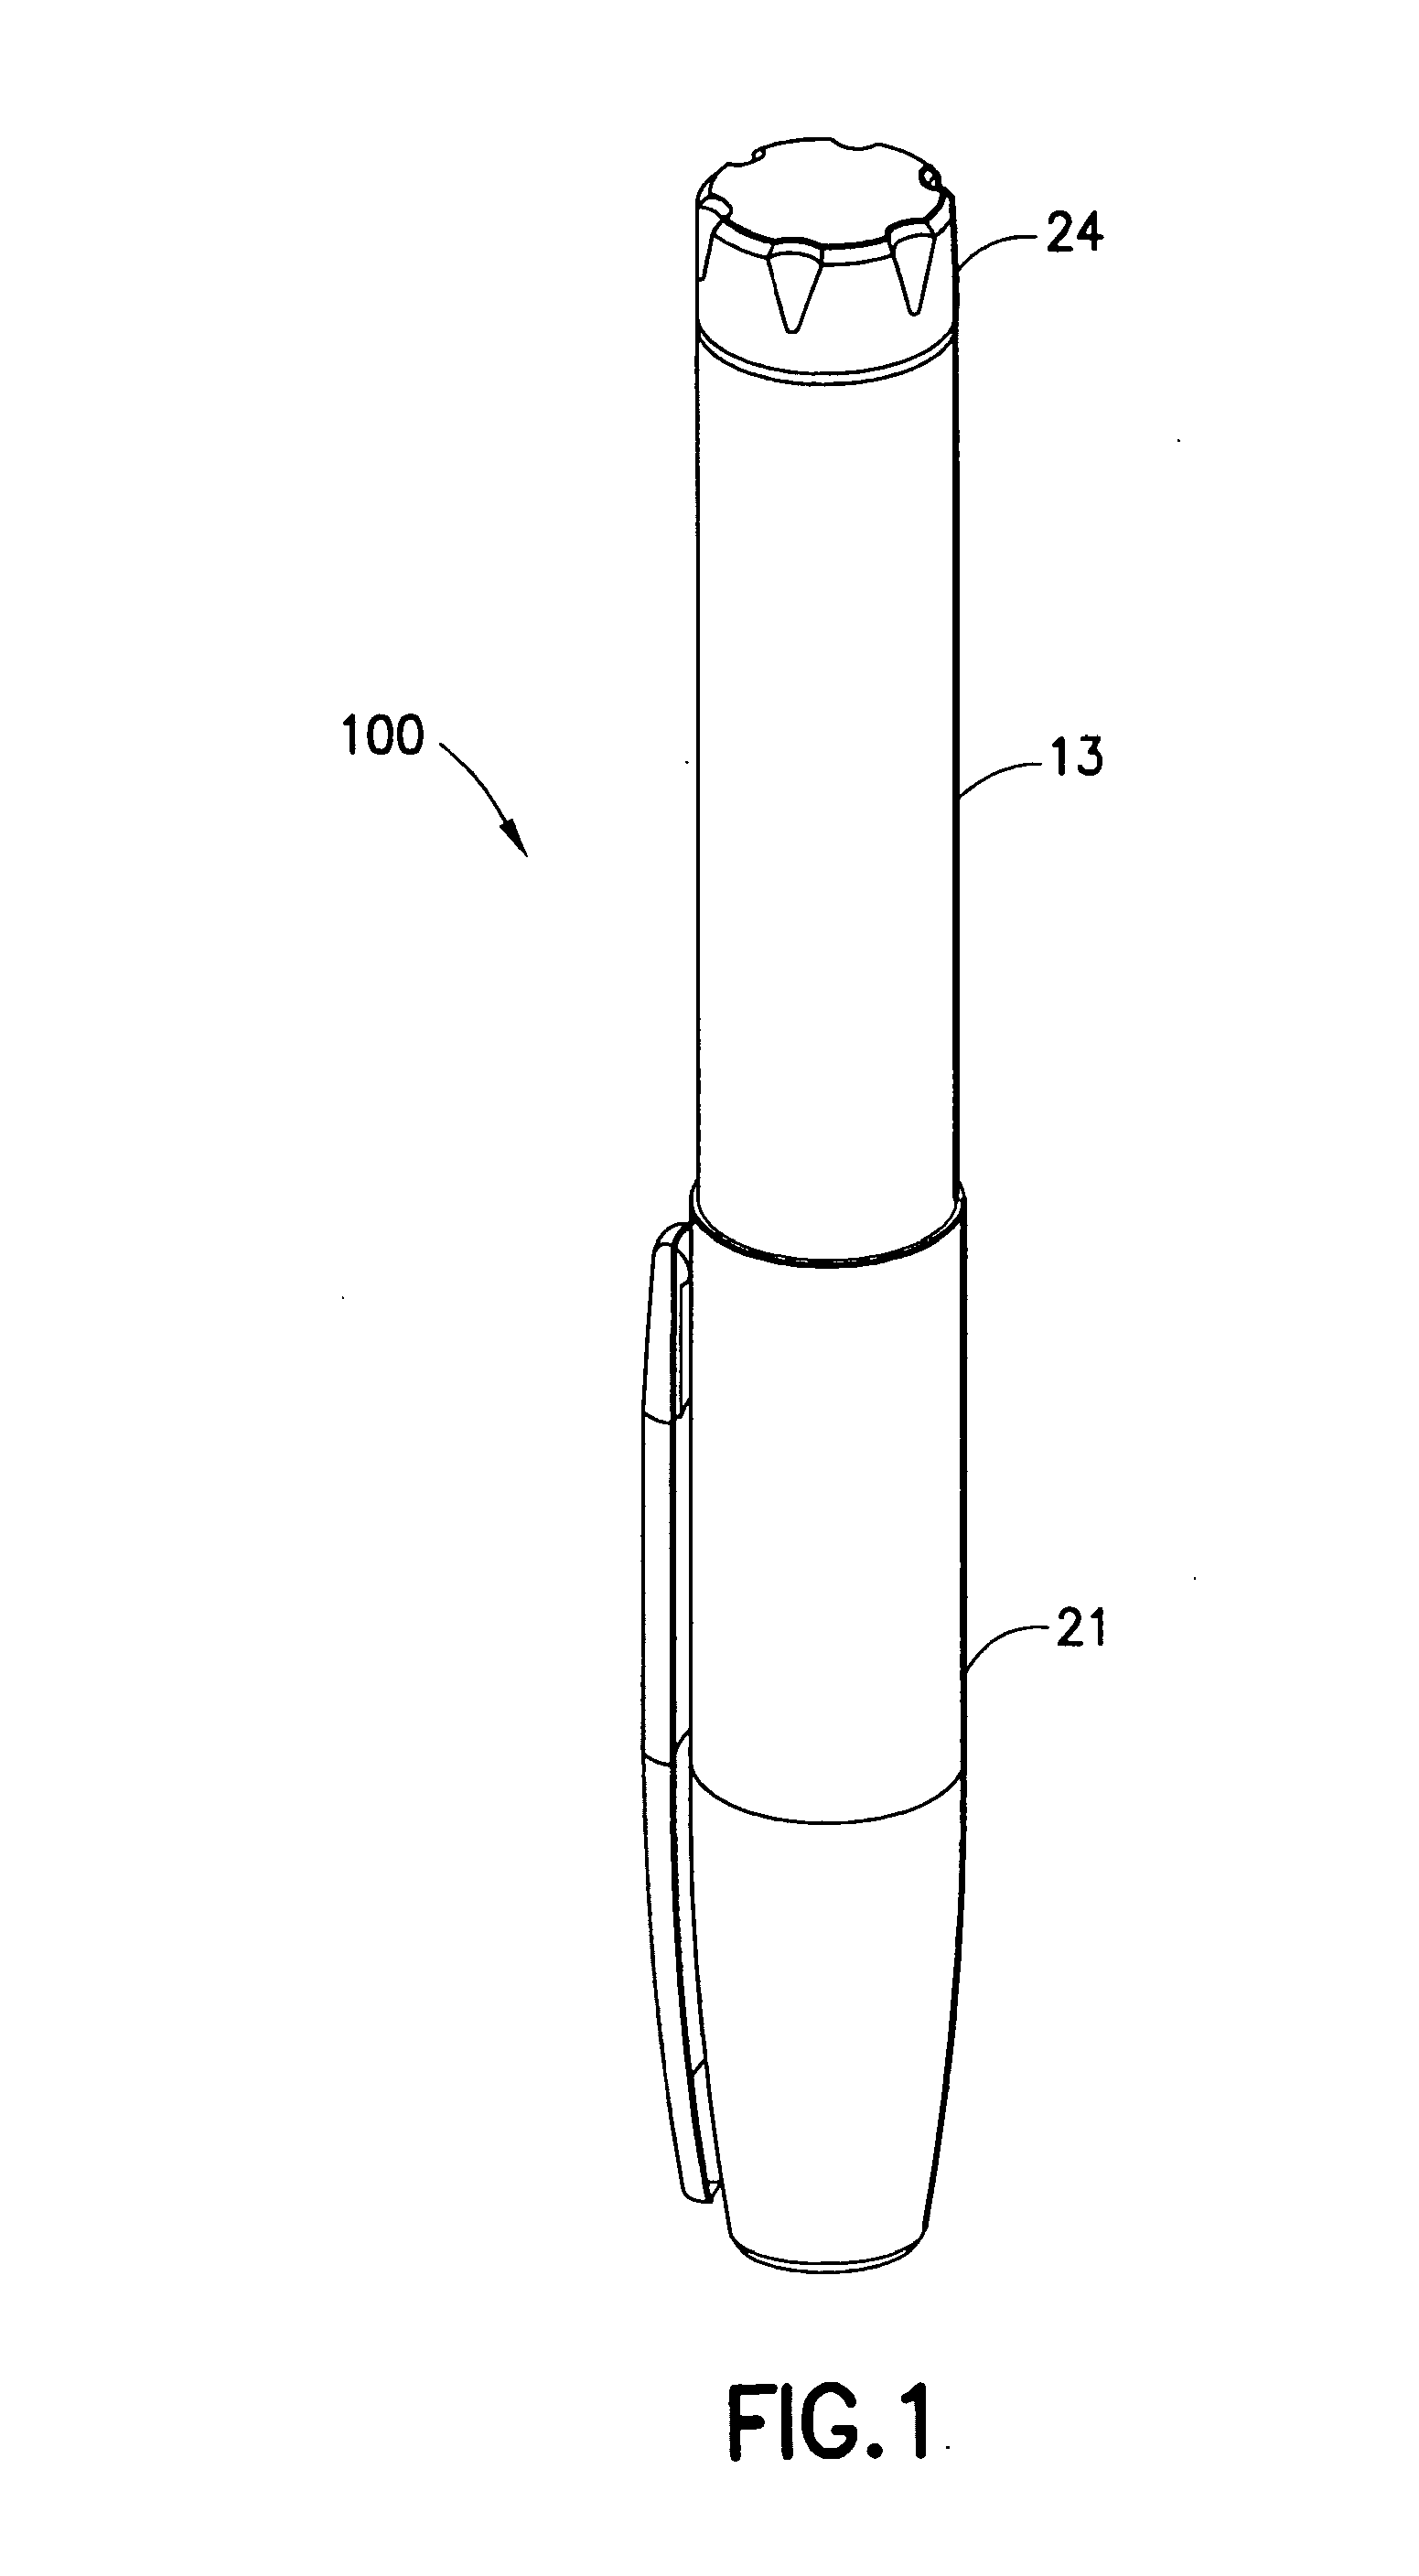 Pen needle assembly having biodegradable components